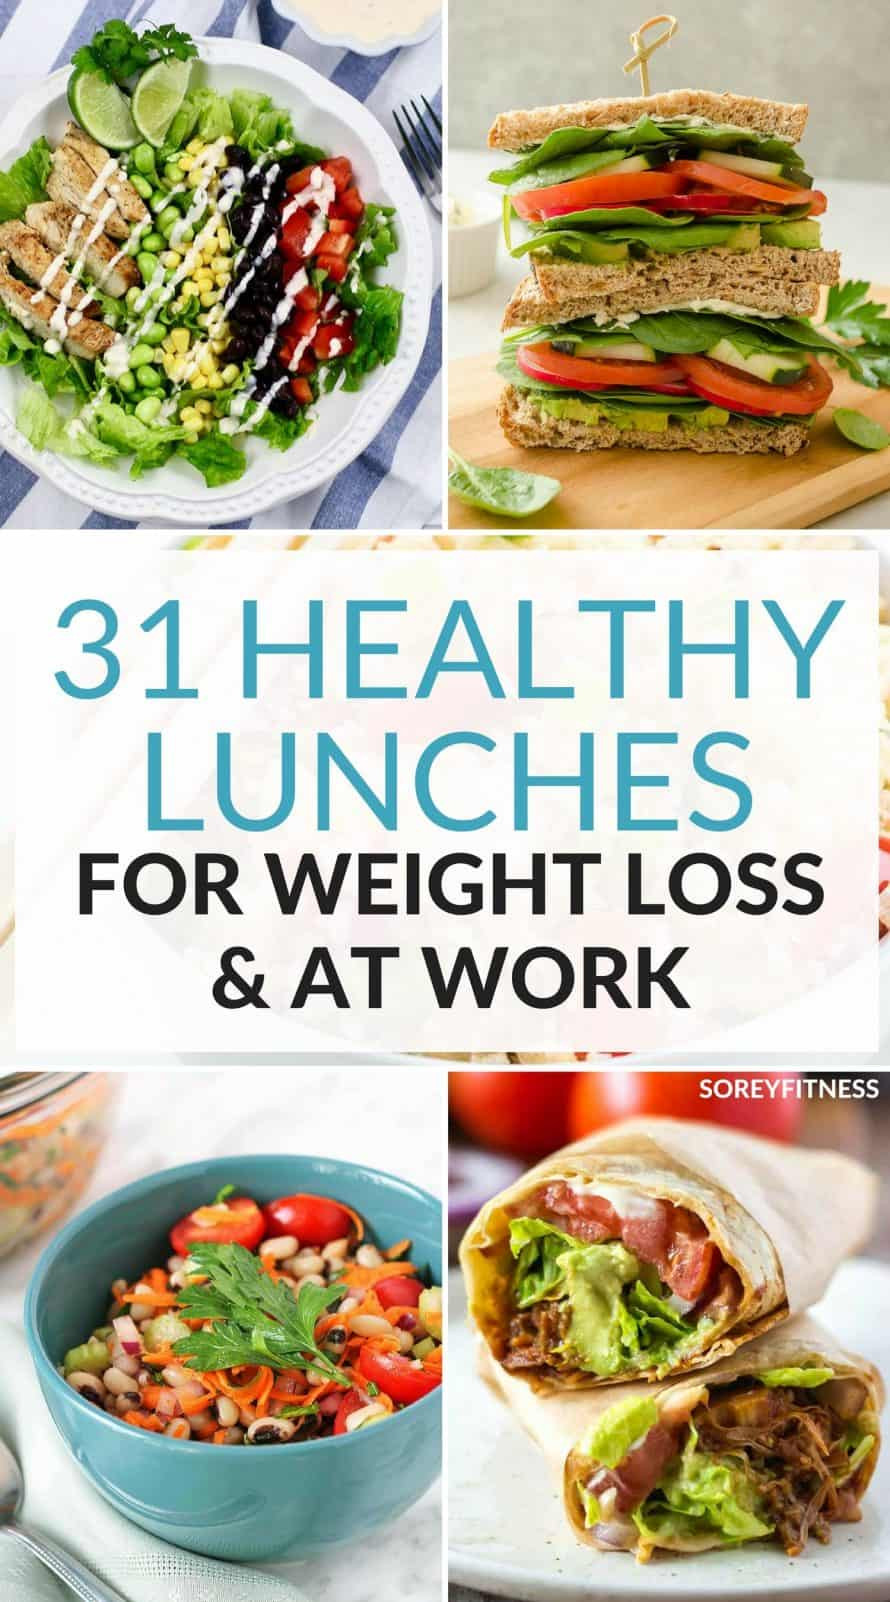 Lunch Recipes For Weight Loss
 31 Healthy Lunch Ideas For Weight Loss Easy Meals for